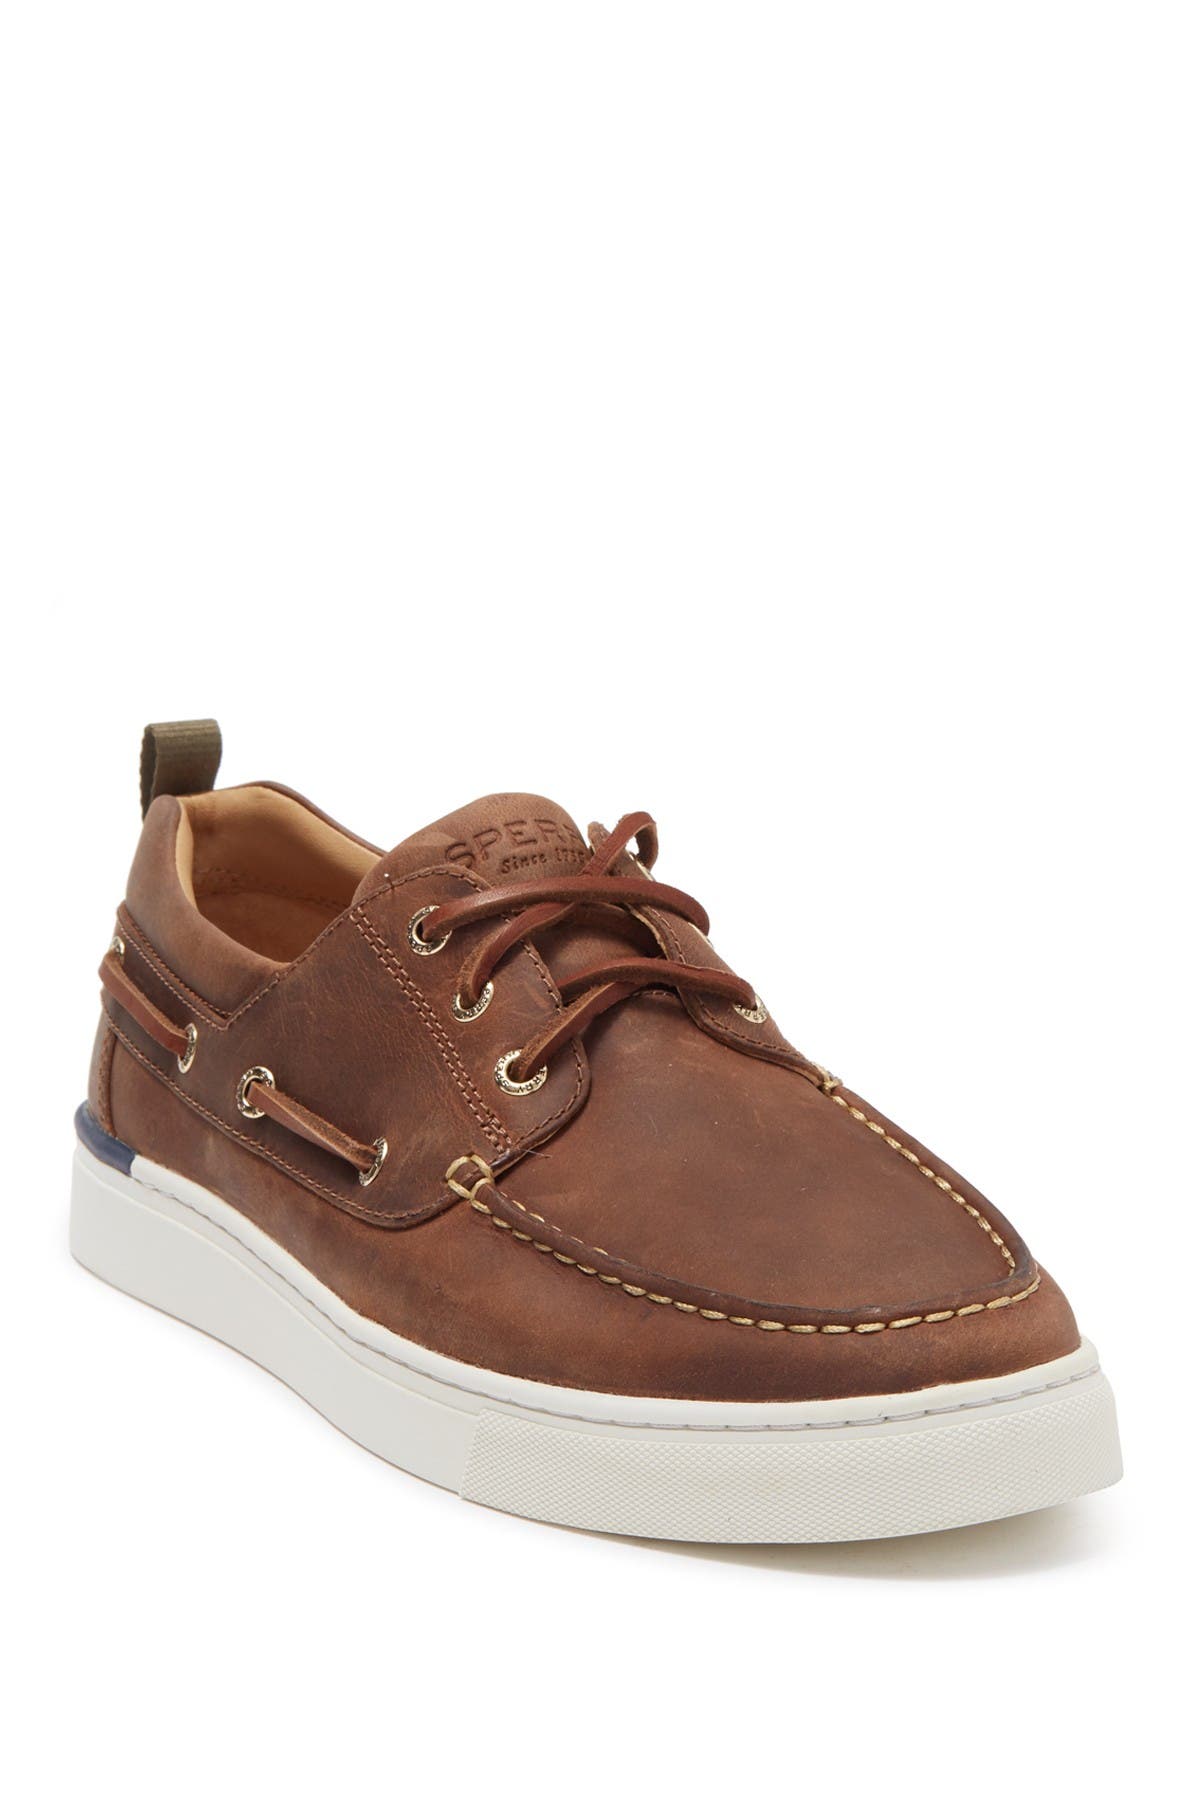 mens boat shoes on sale